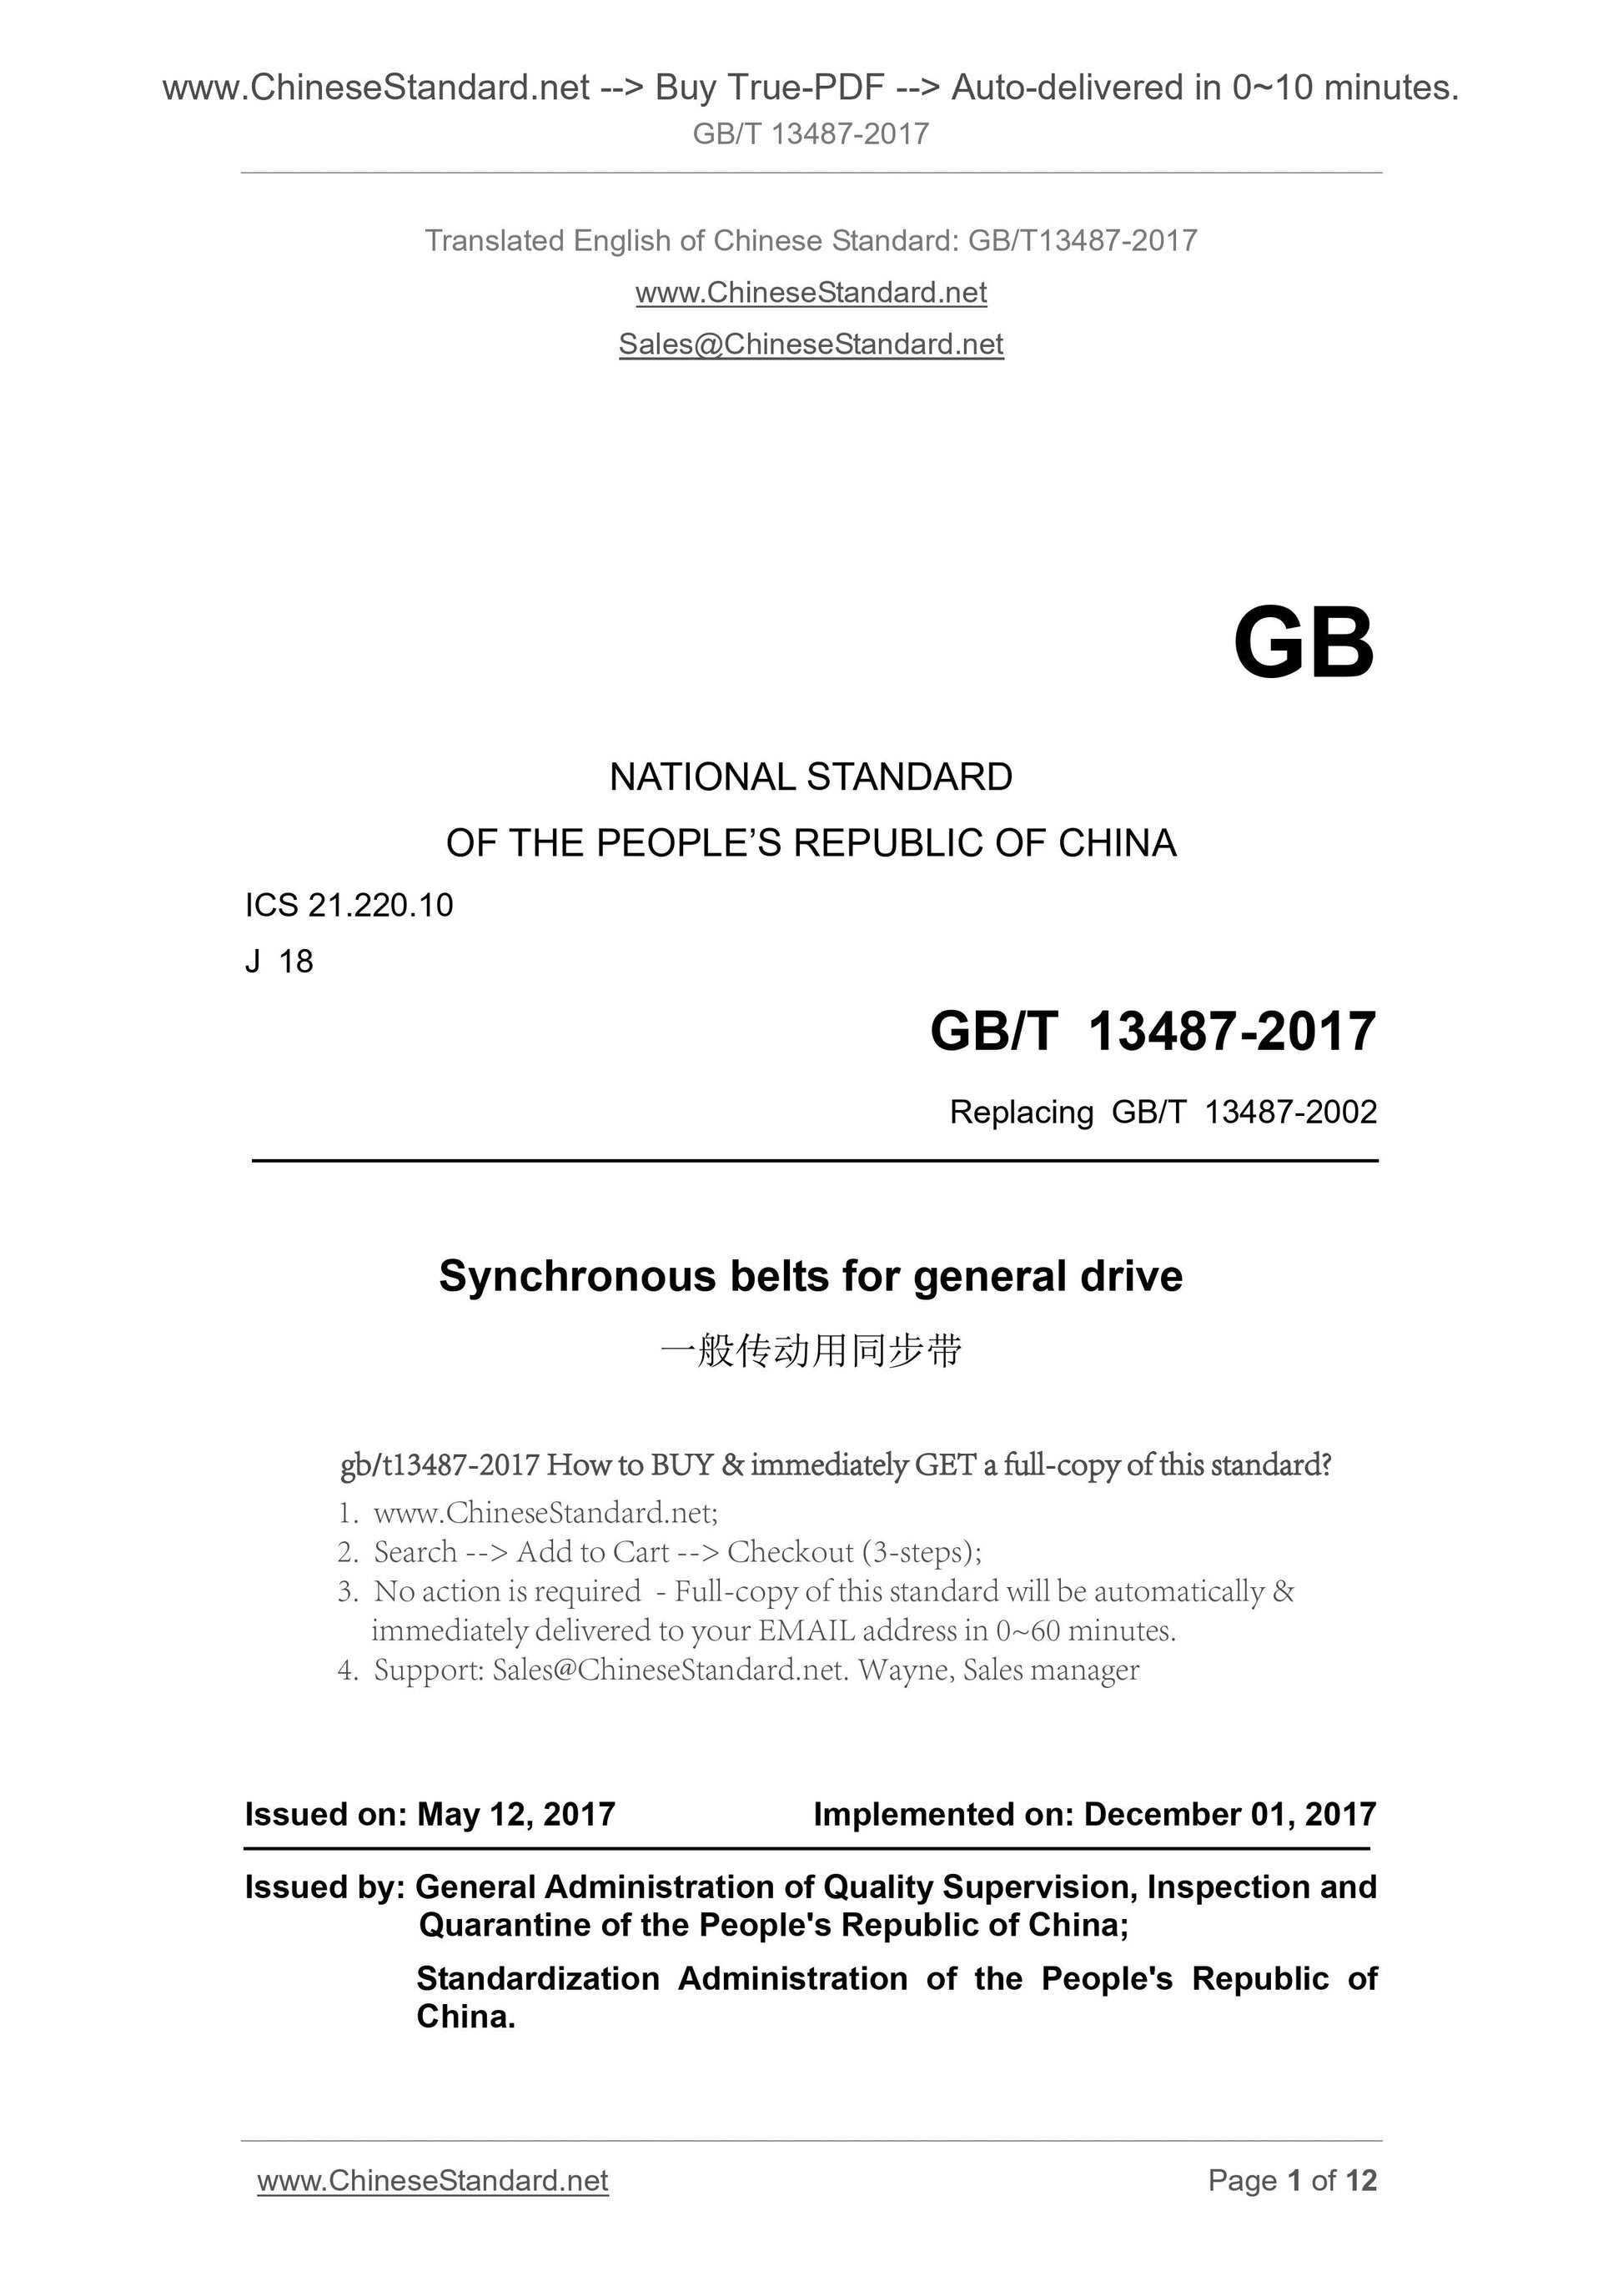 GB/T 13487-2017 Page 1